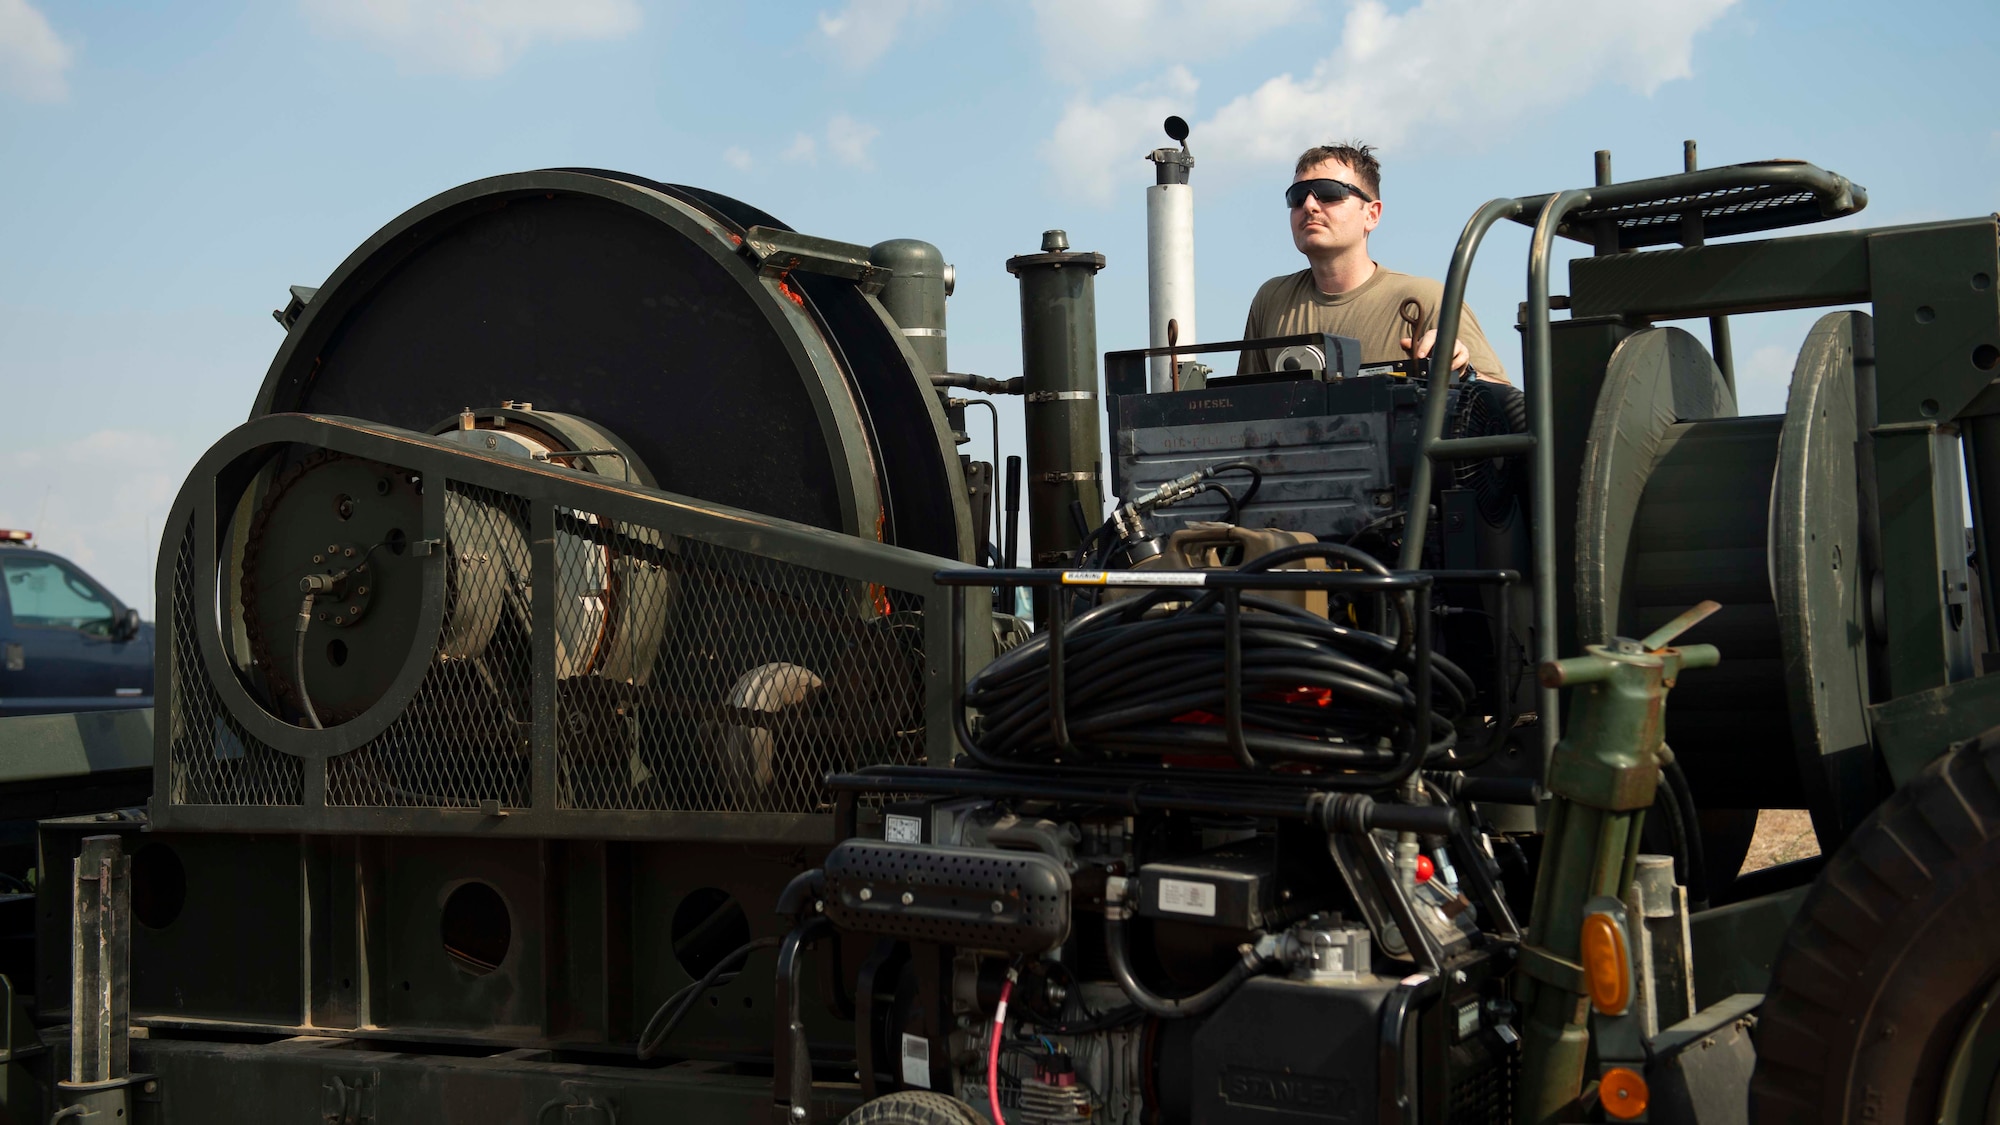 A man in sunglasses is perched atop a large piece of machinery.